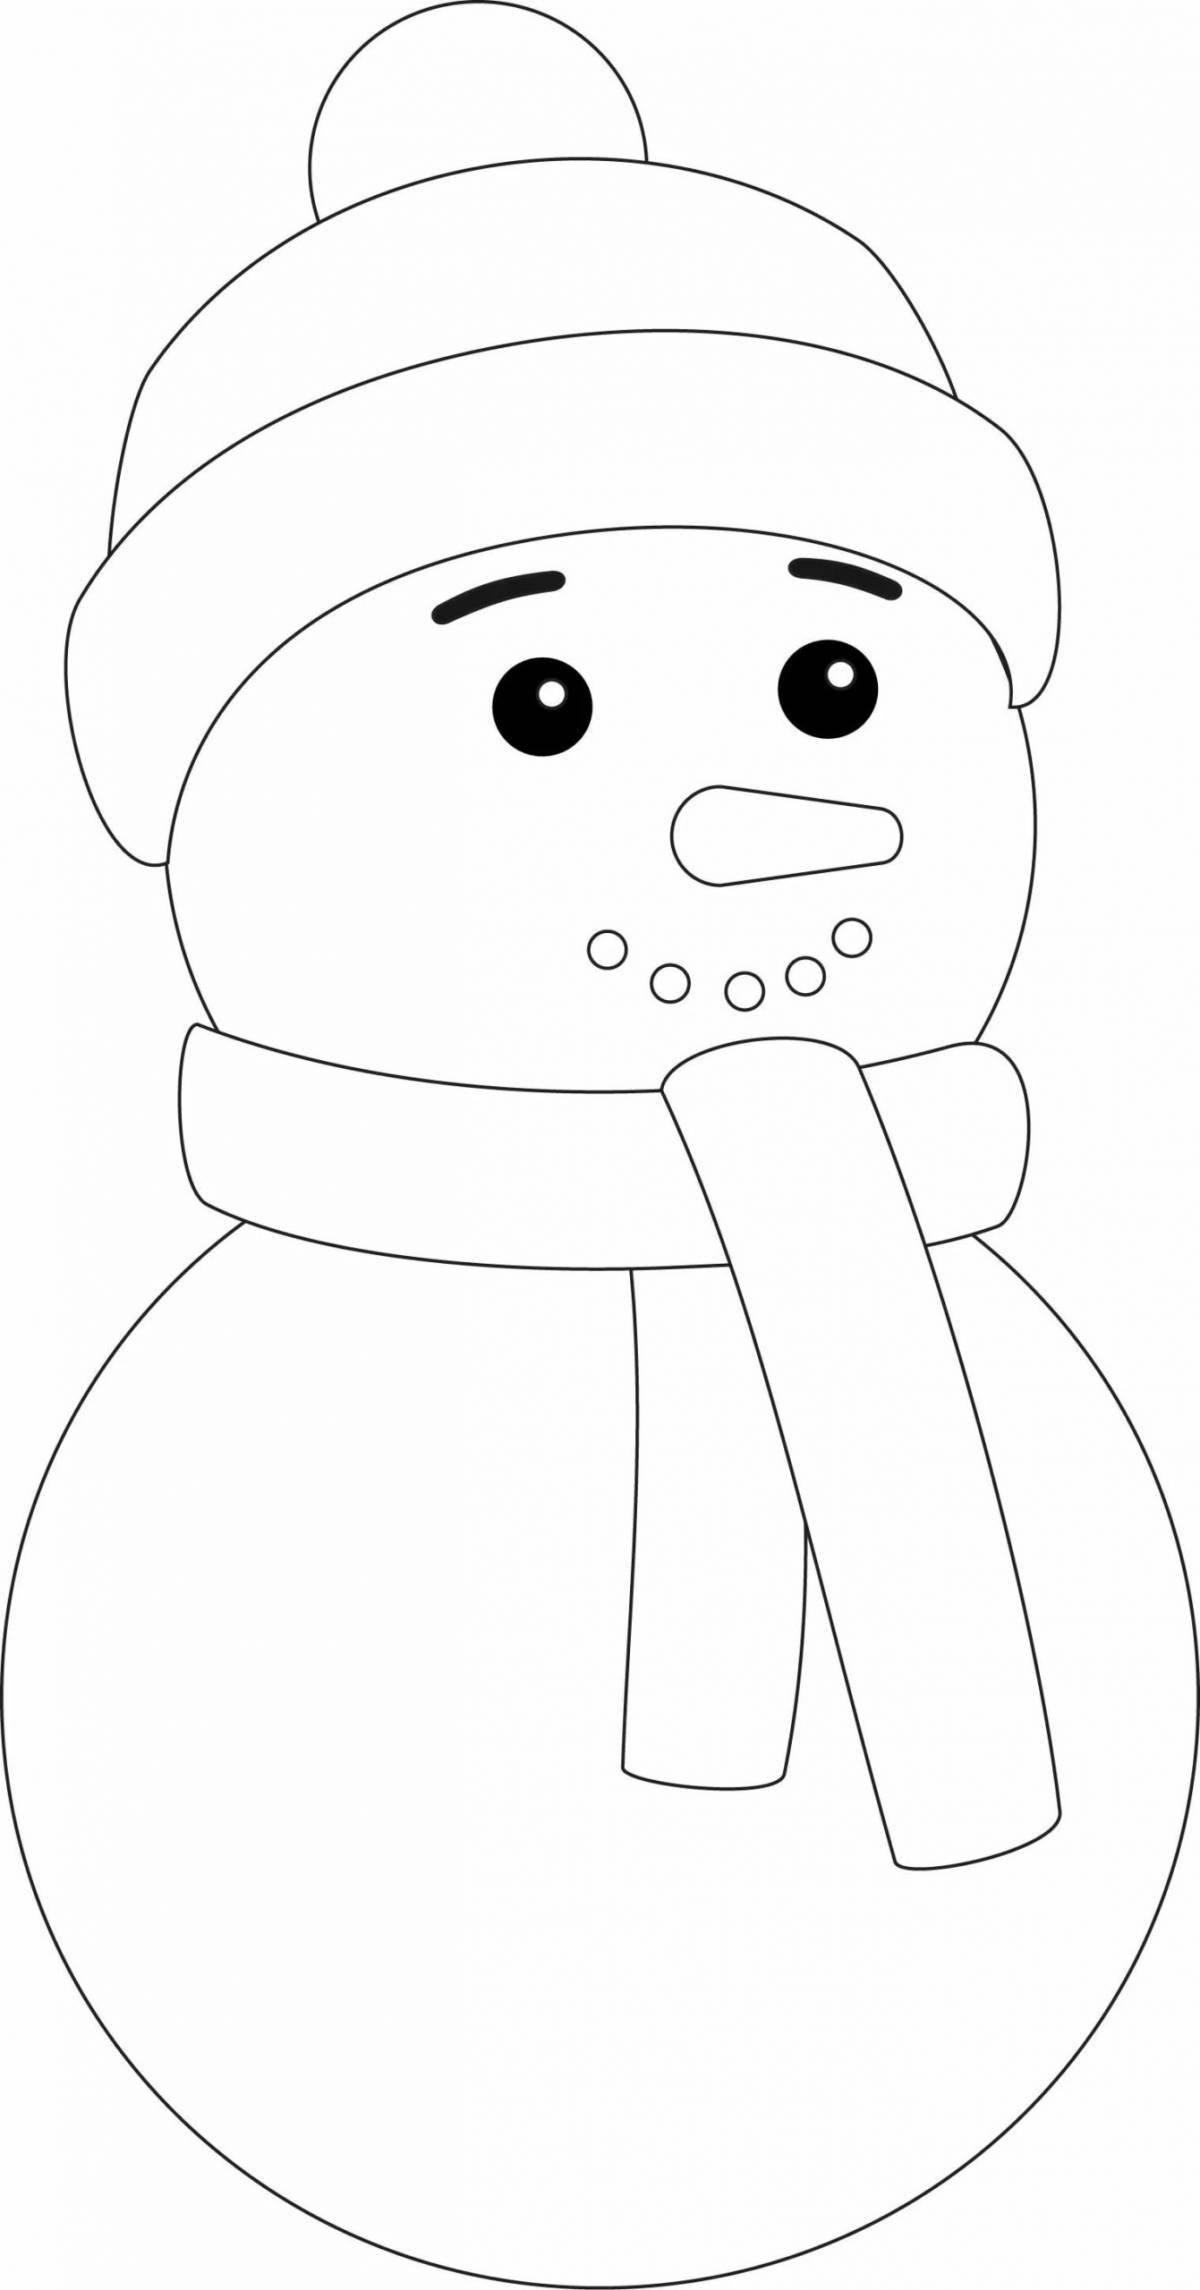 Adorable snowman mask coloring page